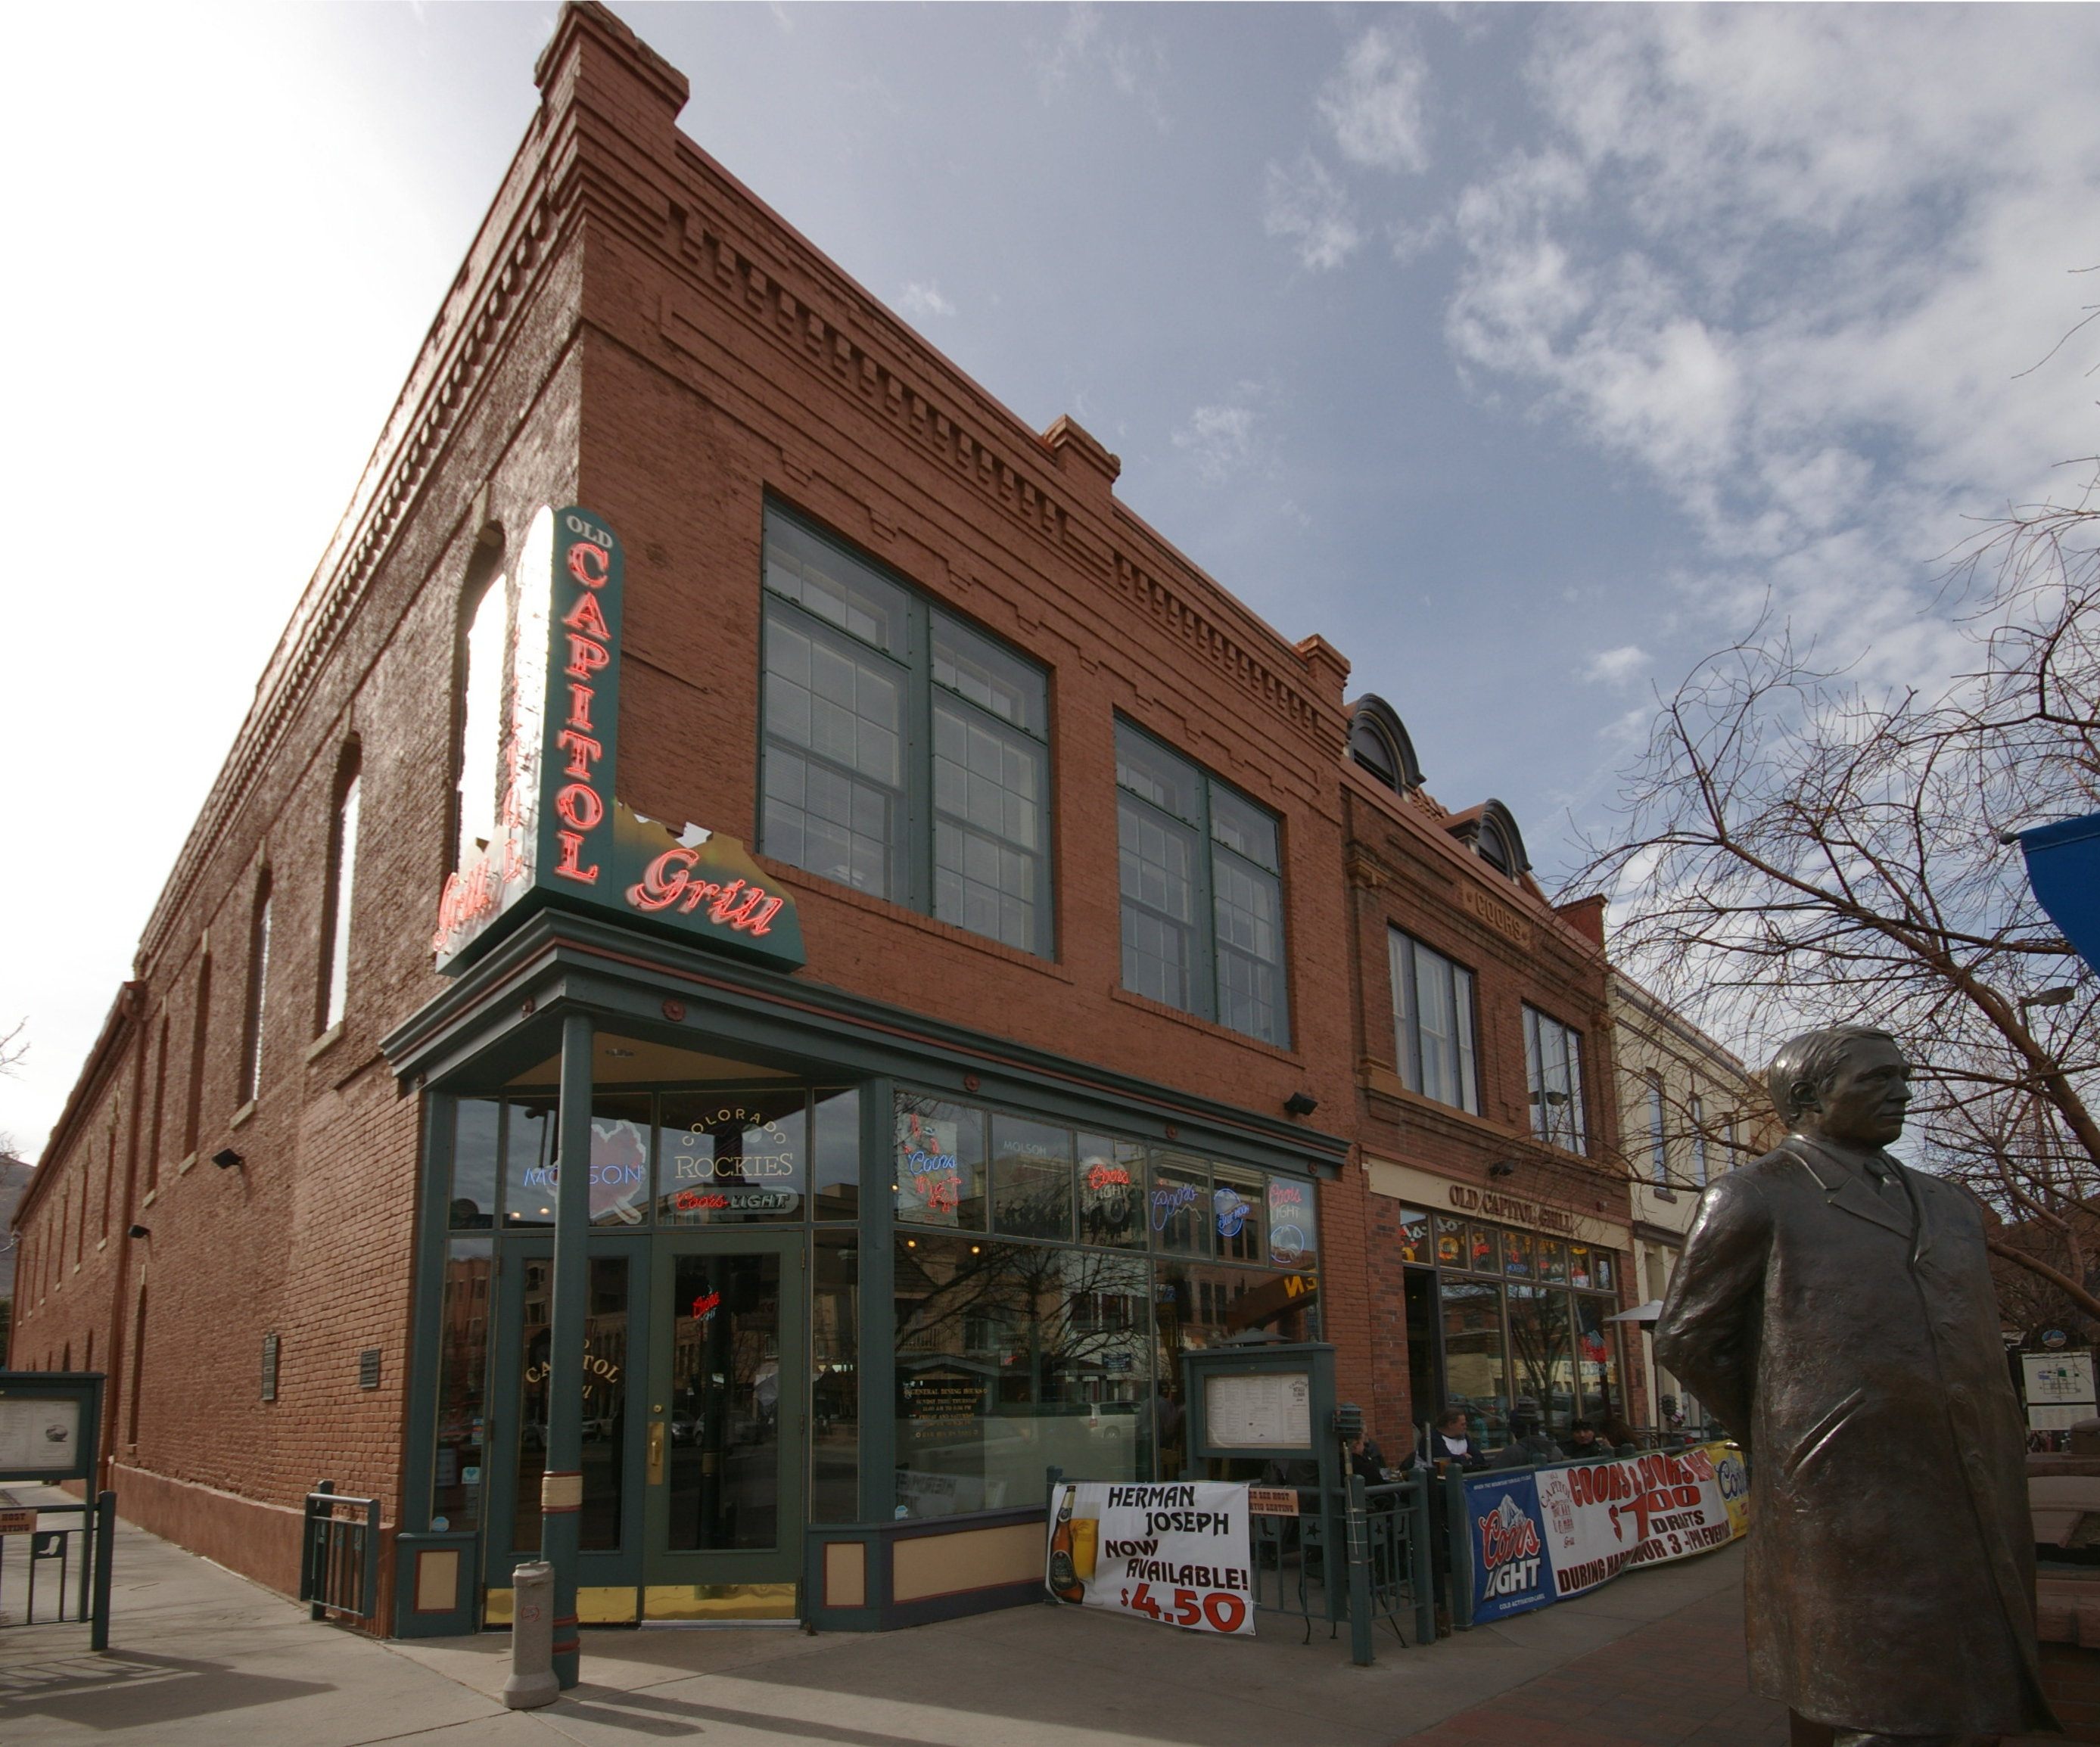 Golden, CO is the home of Coors Brewery, established on the historic Loveland Block (pictured) in 1873. 